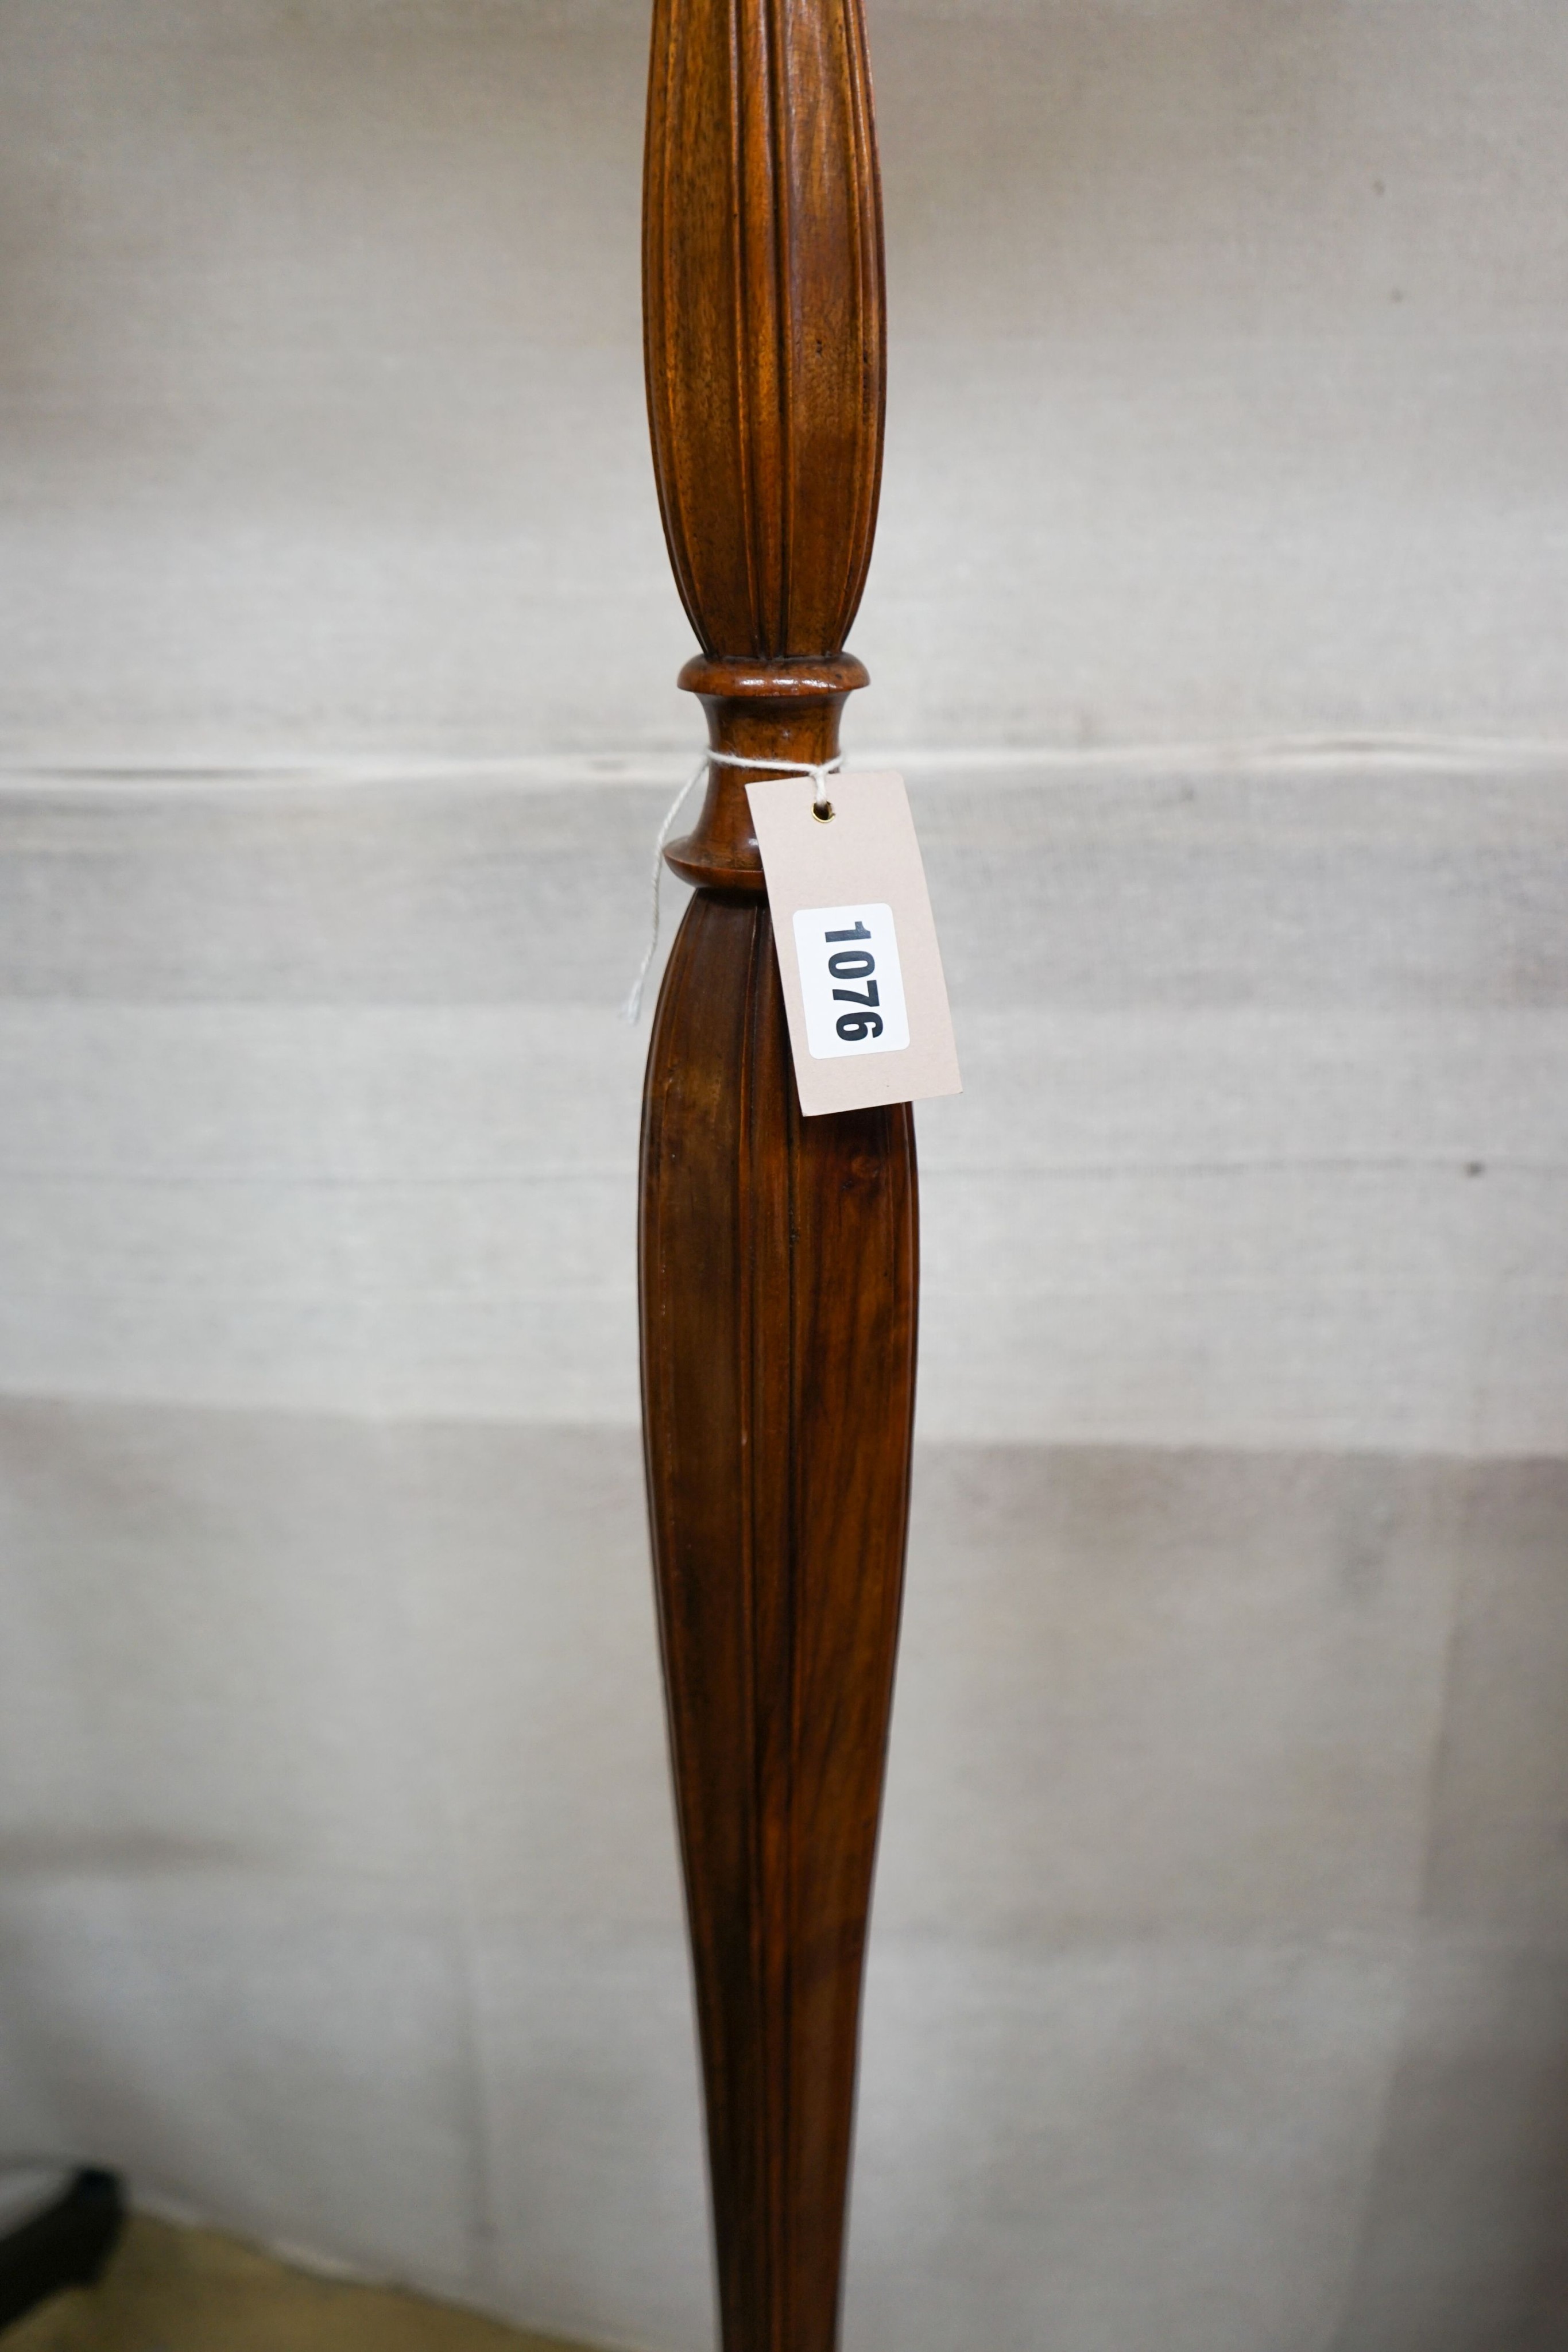 A turned and carved walnut standard lamp on circular base with bun feet, height excluding shade 132cm